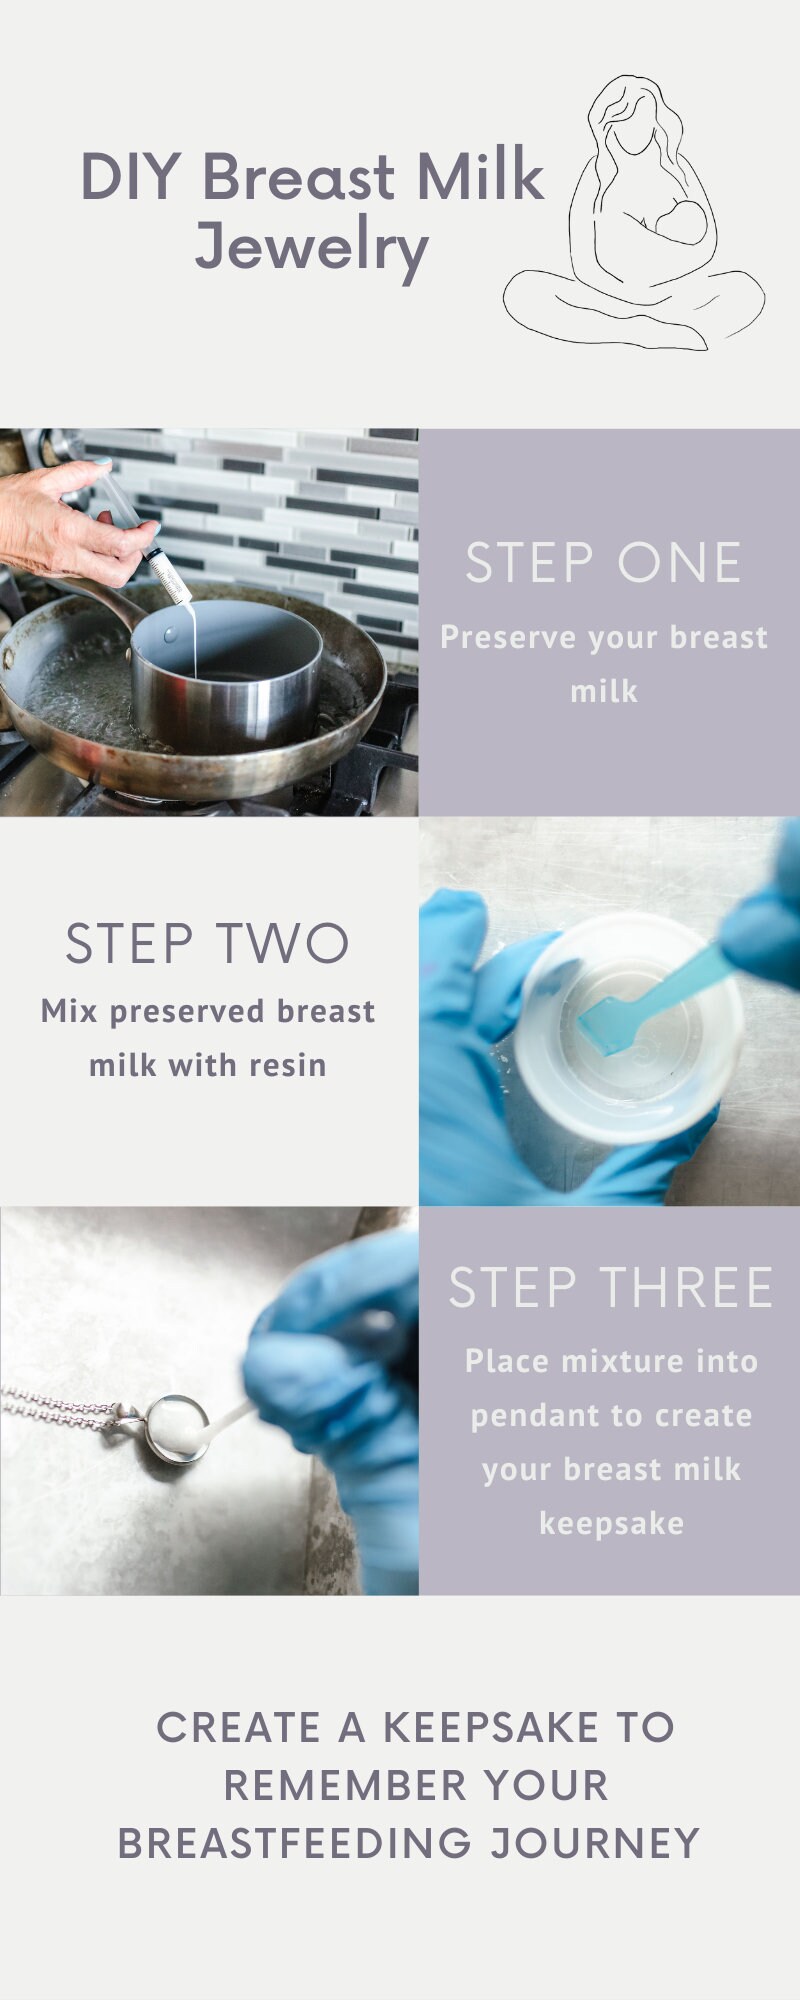 Breastmilk jewelry: A way to commemorate your breastfeeding